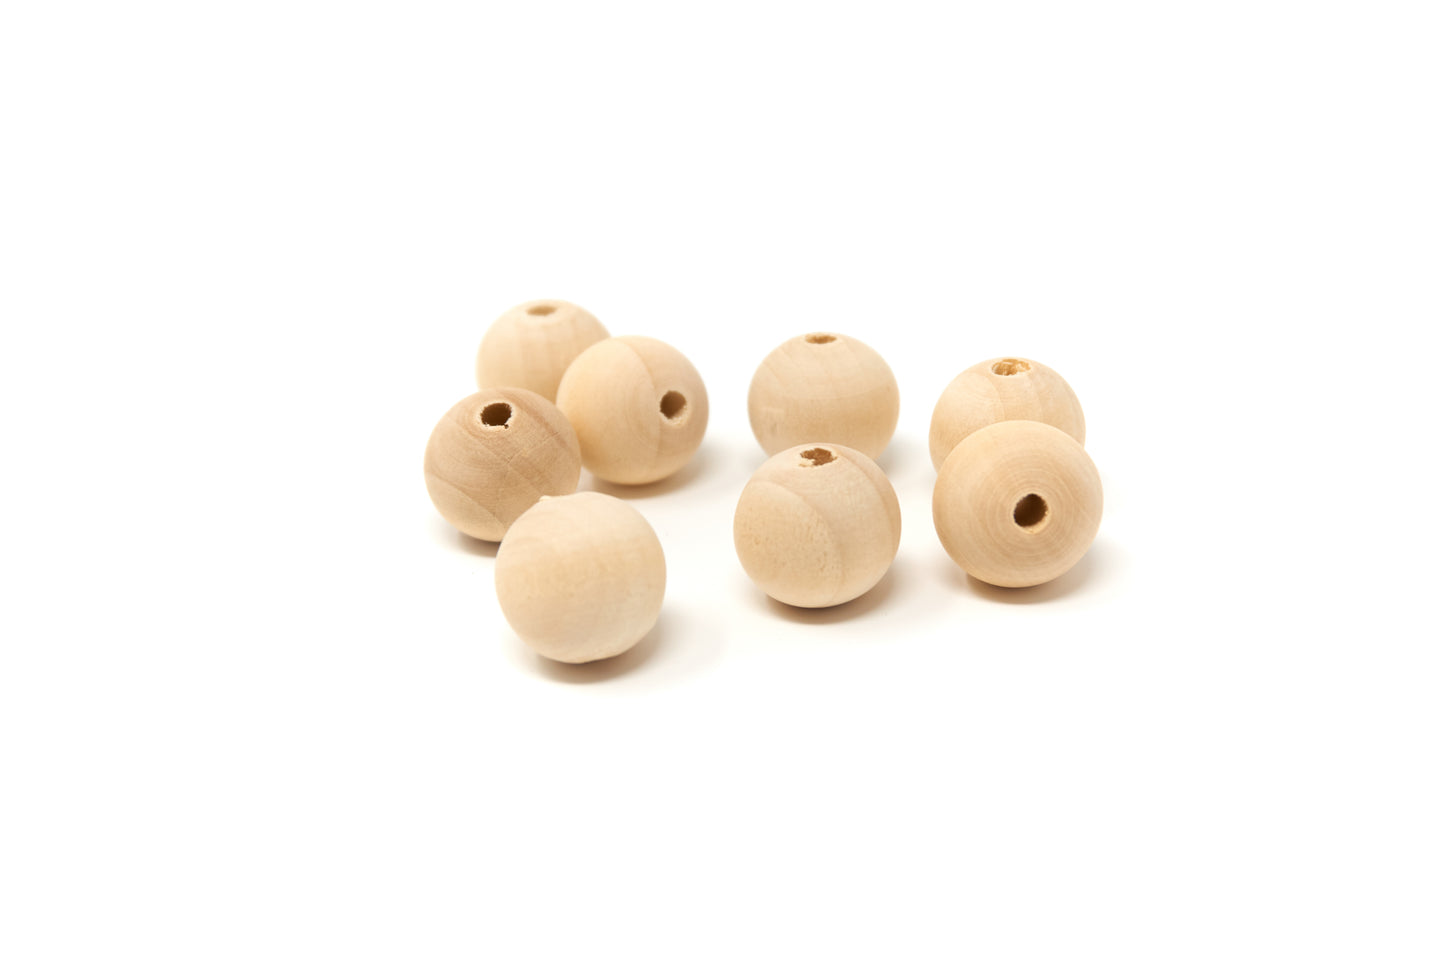 Natural Round Wood Beads 20mm 36 pieces - Cameos Art Shop